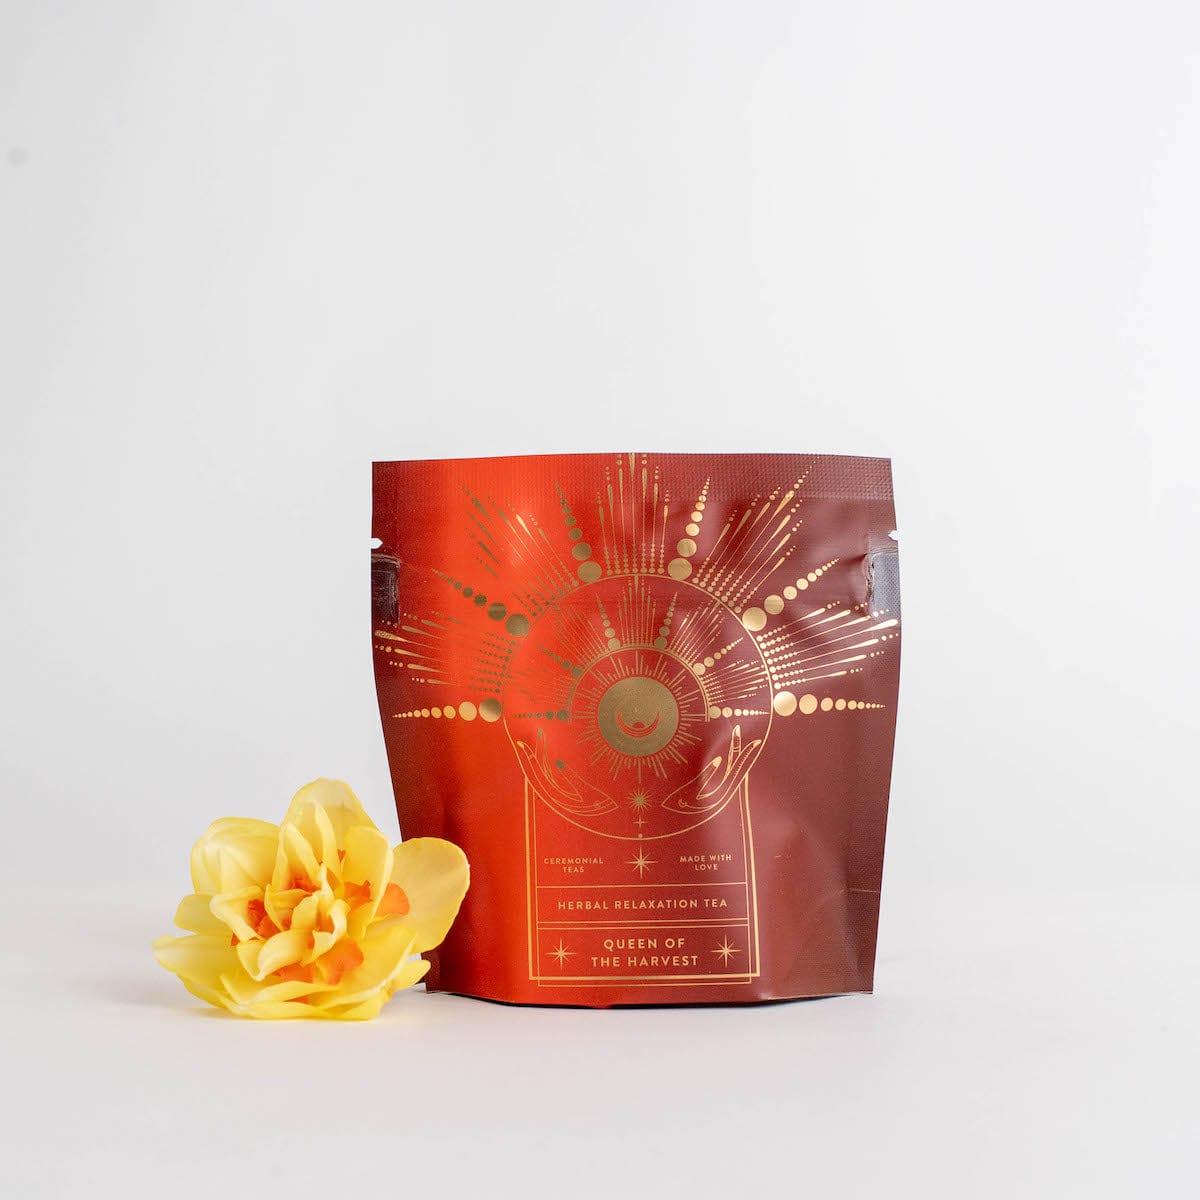 A pouch of **Queen of the Harvest : Herbal Relaxation Tea** labeled **Magic Hour** with an intricate gold design stands against a white background. To the left of the pouch, there is a vibrant yellow flower placed for decoration, enhancing the allure of this organic loose leaf tea.